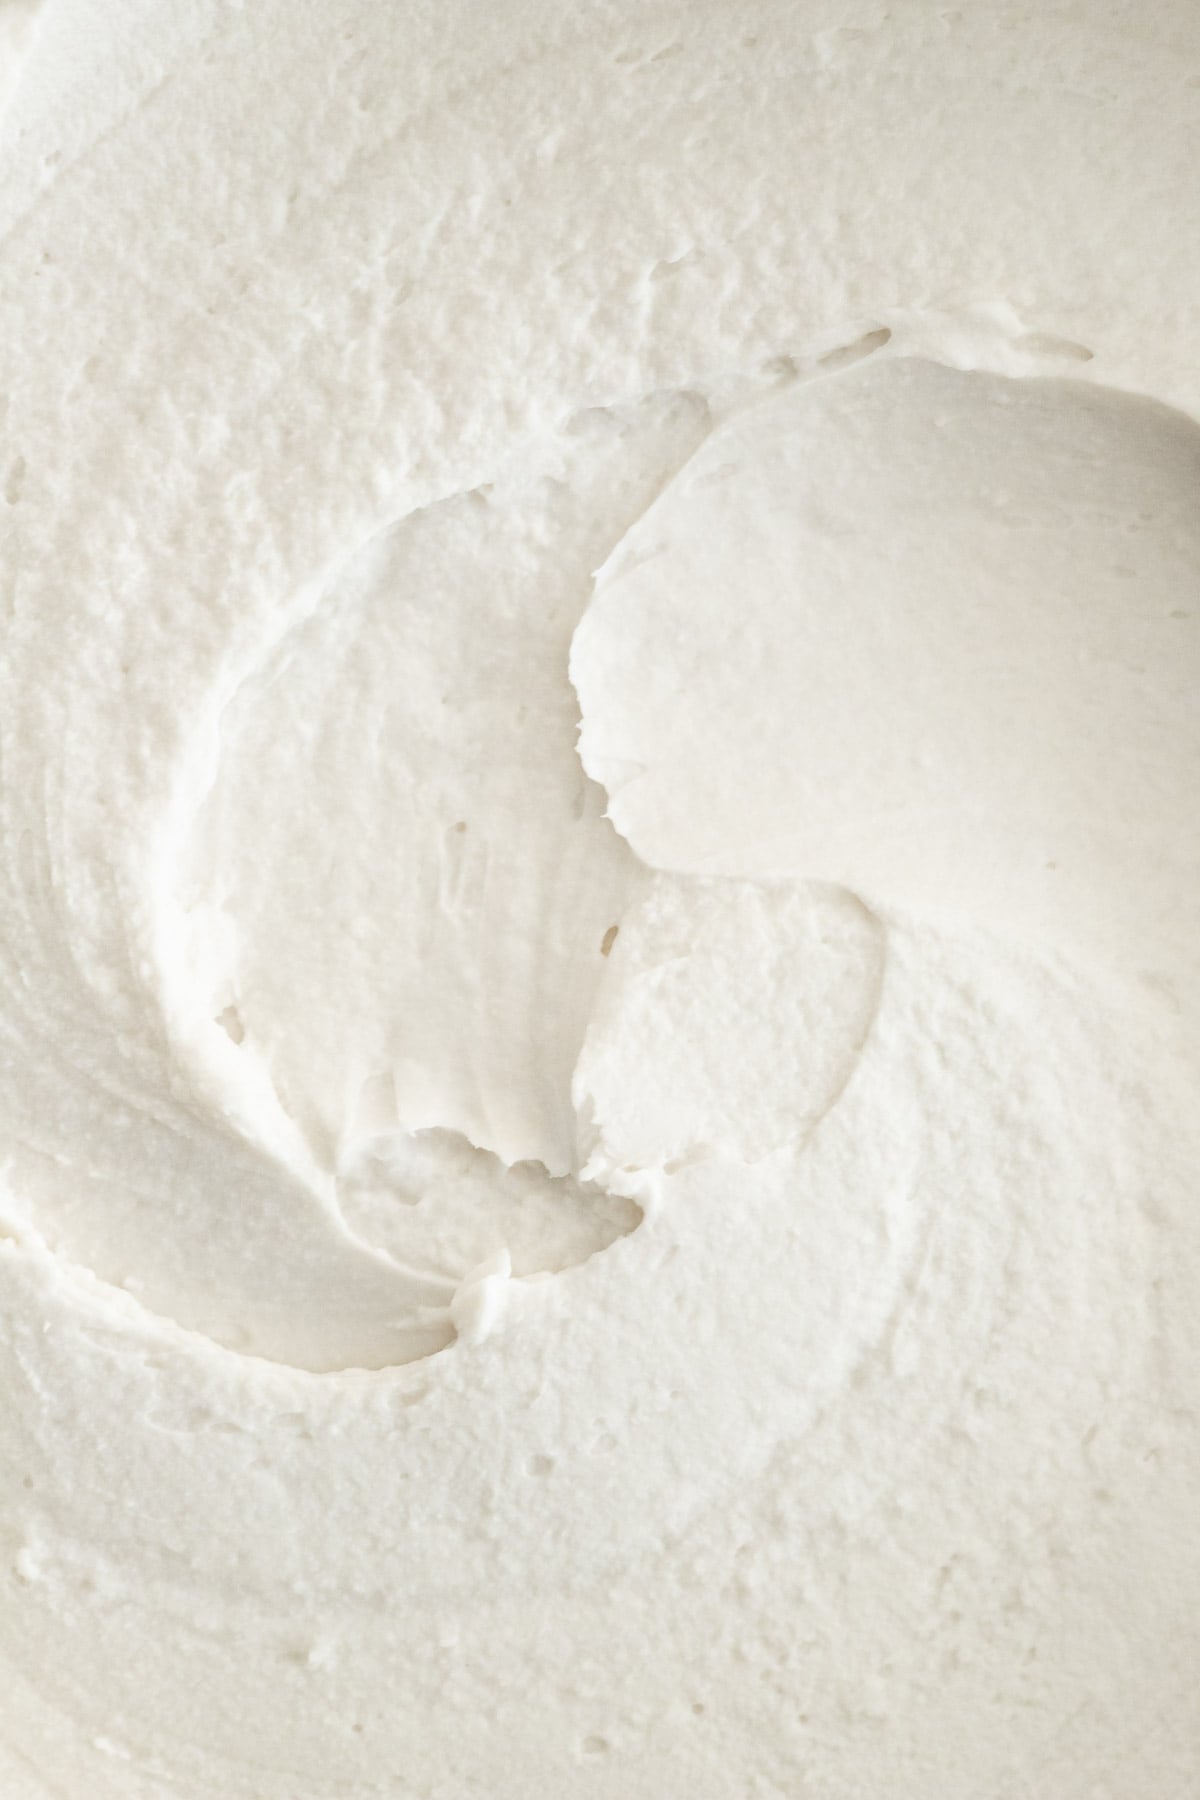 Close up of dairy-free whipped cream.